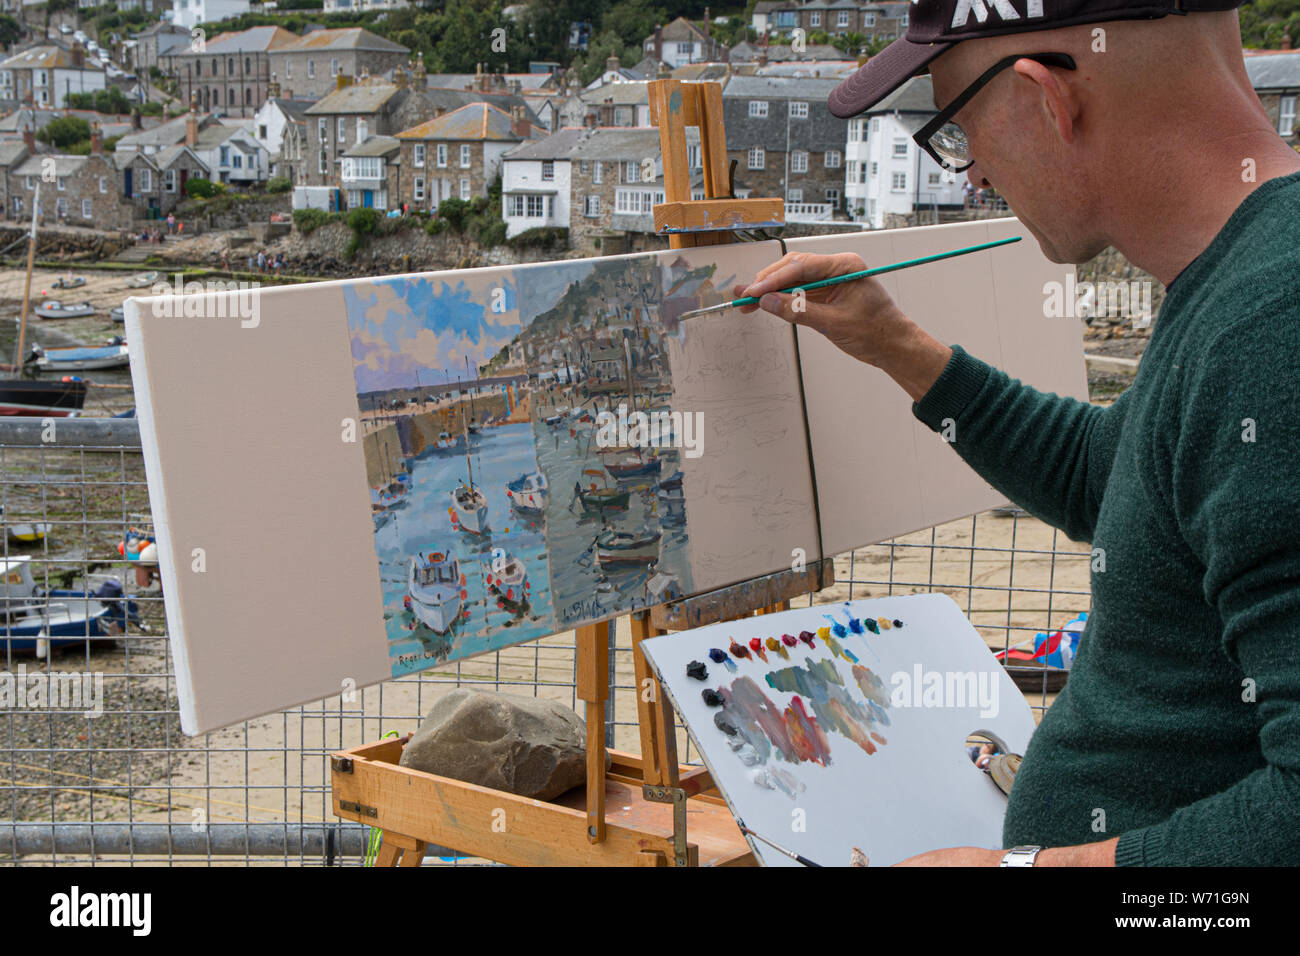 Mousehole, Cornwall, UK. 4th August 2019. Seen here Tim Hall, a former winner of the Sea Pictures Gallery Award by Royal society of Marine Artists, painting his section of a panorama of Mousehole harbour and village. the picture will be auctioned off later to raise funds for the annual festival. The other artists painting are Roger Curtis, Lizzie Black, Tom Rickman, Jeremy Sanders, Judy Joel and finally Nigel Hallard. Credit Simon Maycock / Alamy Live News. Stock Photo